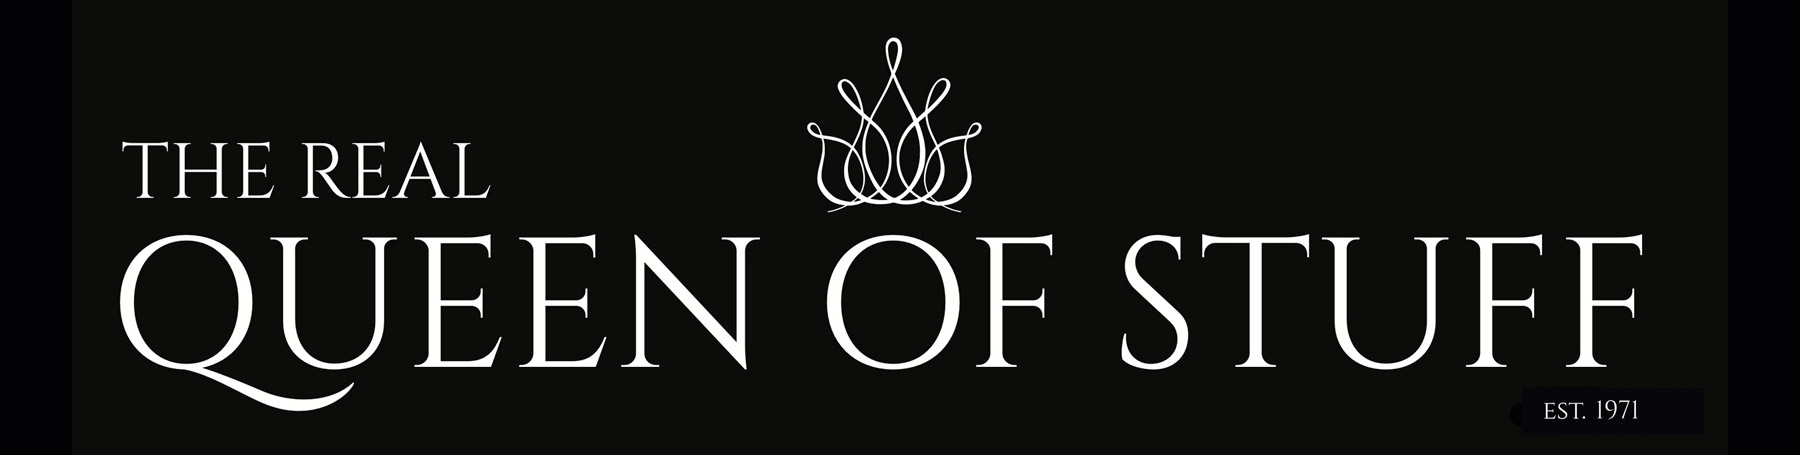 The Real Queen of Stuff Logo with white letters and crown drawing on black background